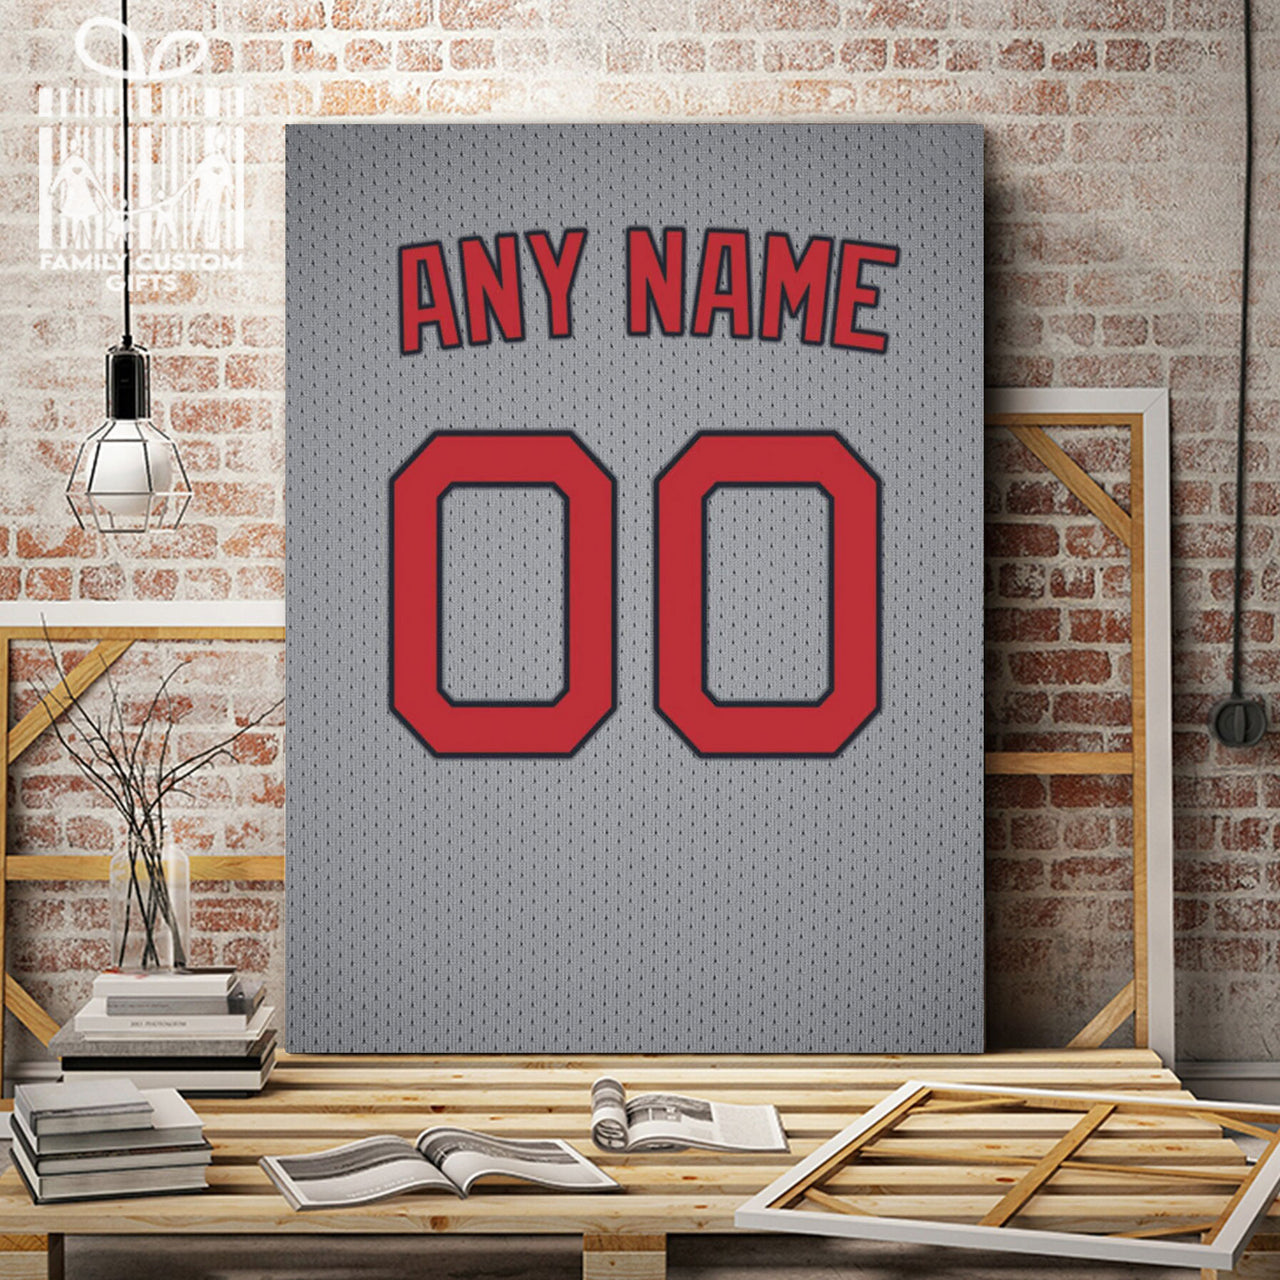 Boston Red Sox personalized Jersey